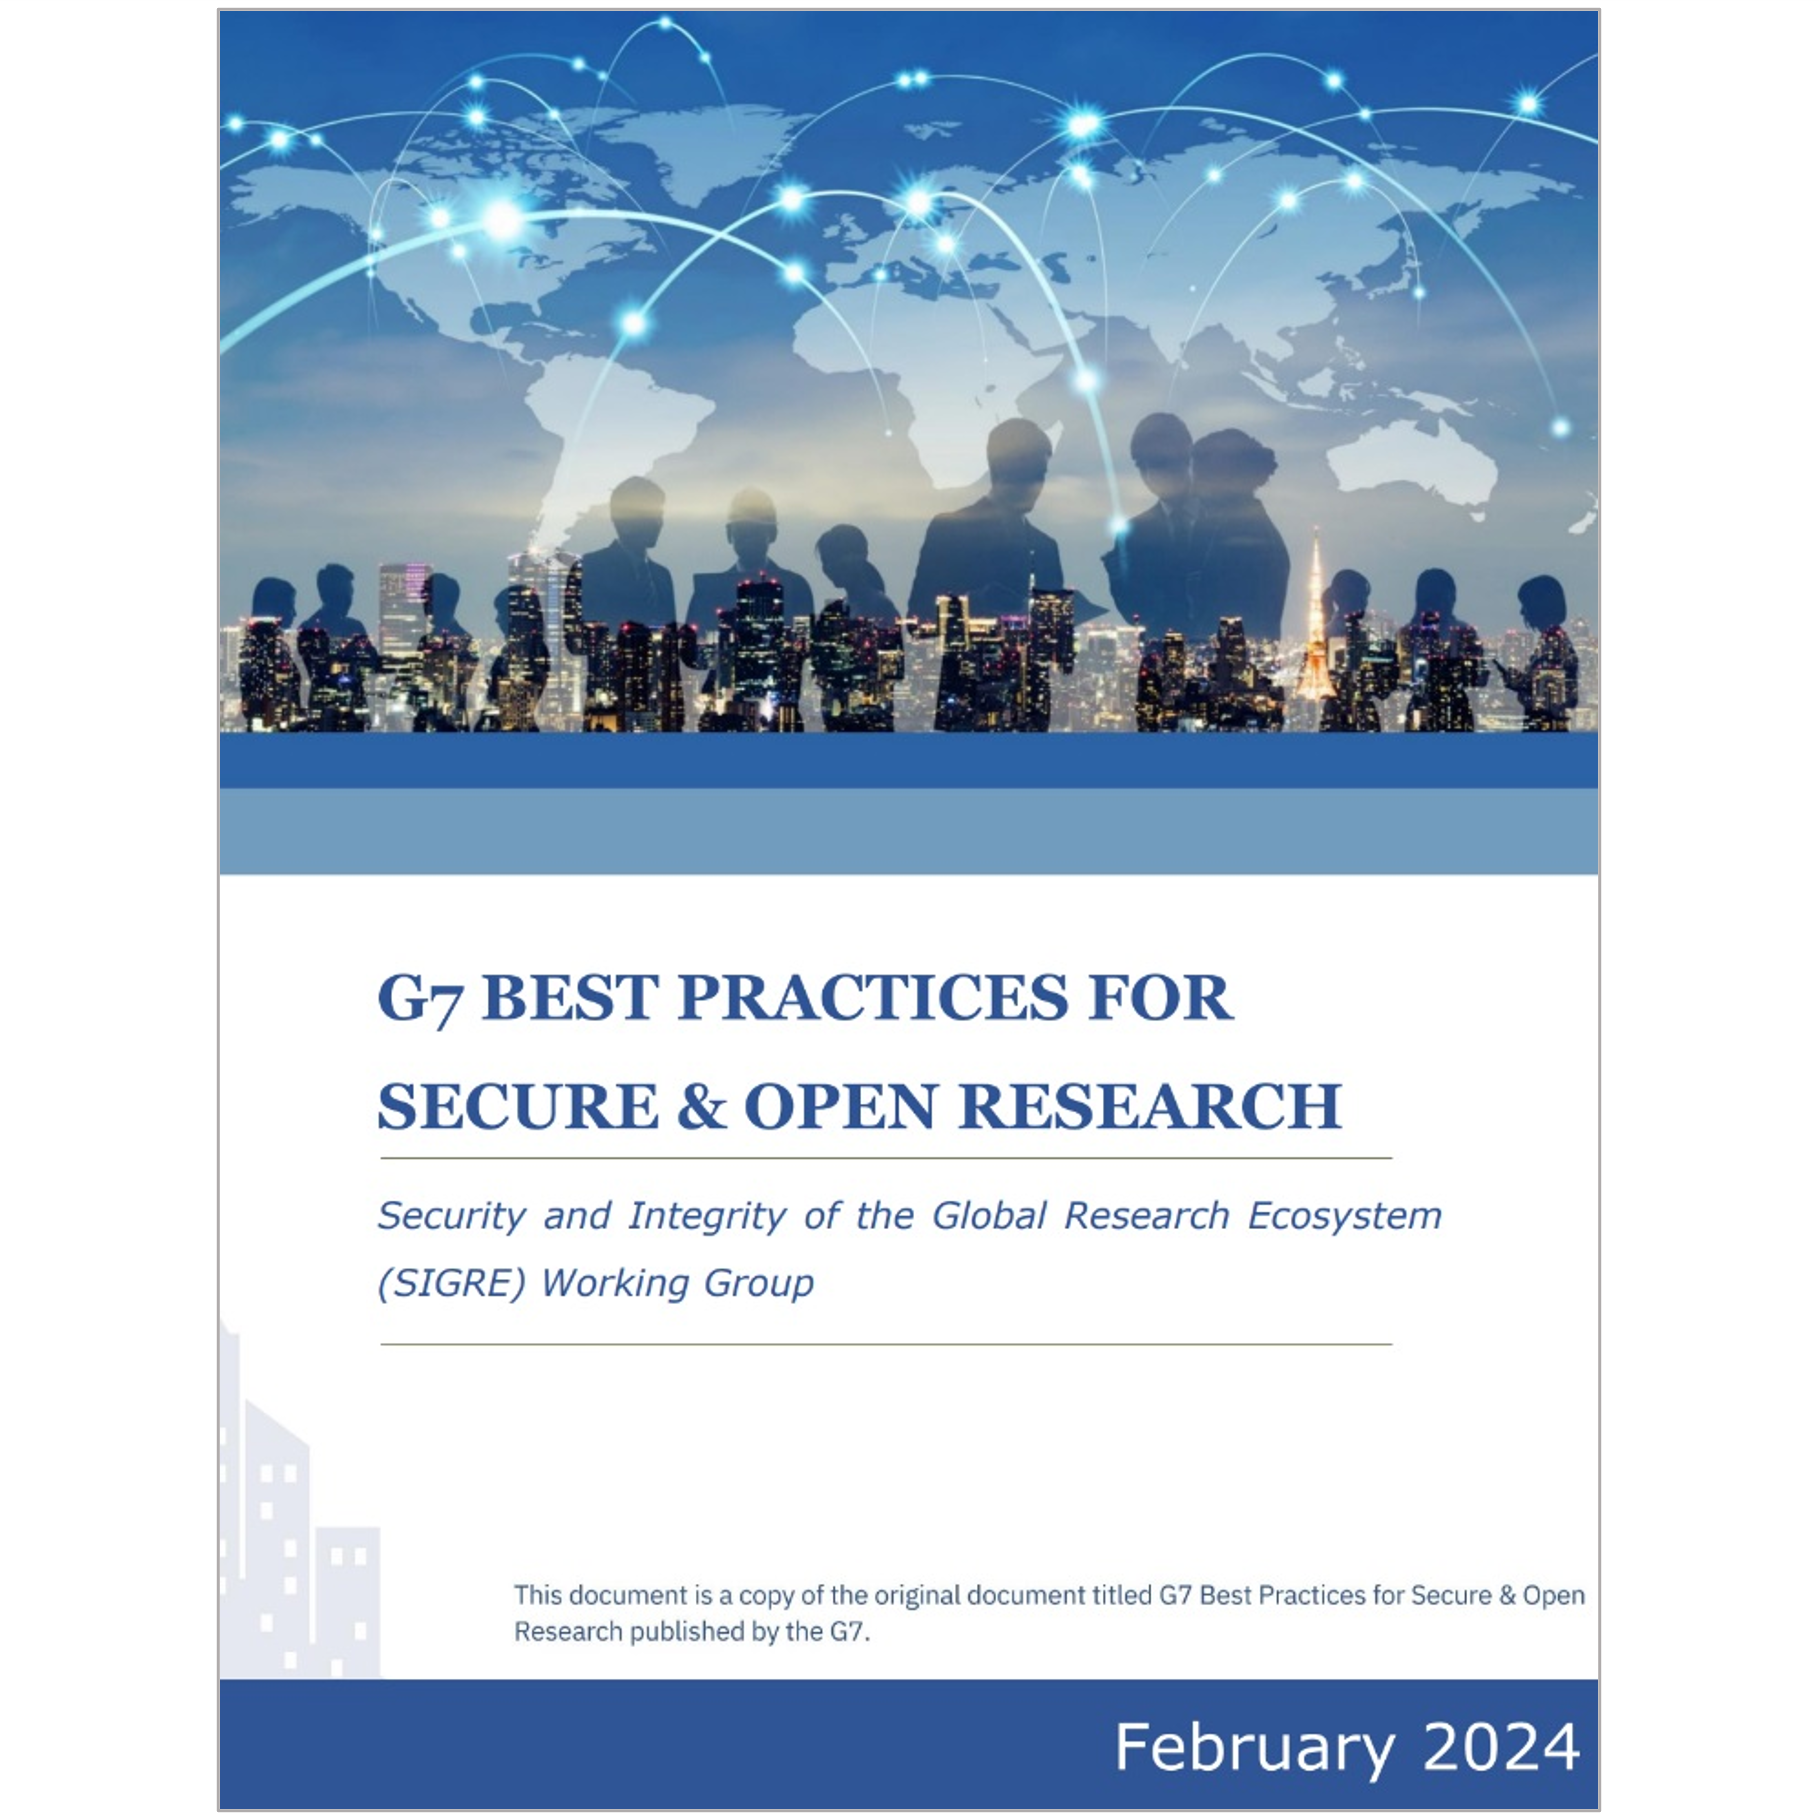 G7 Best Practices for Secure and Open Research